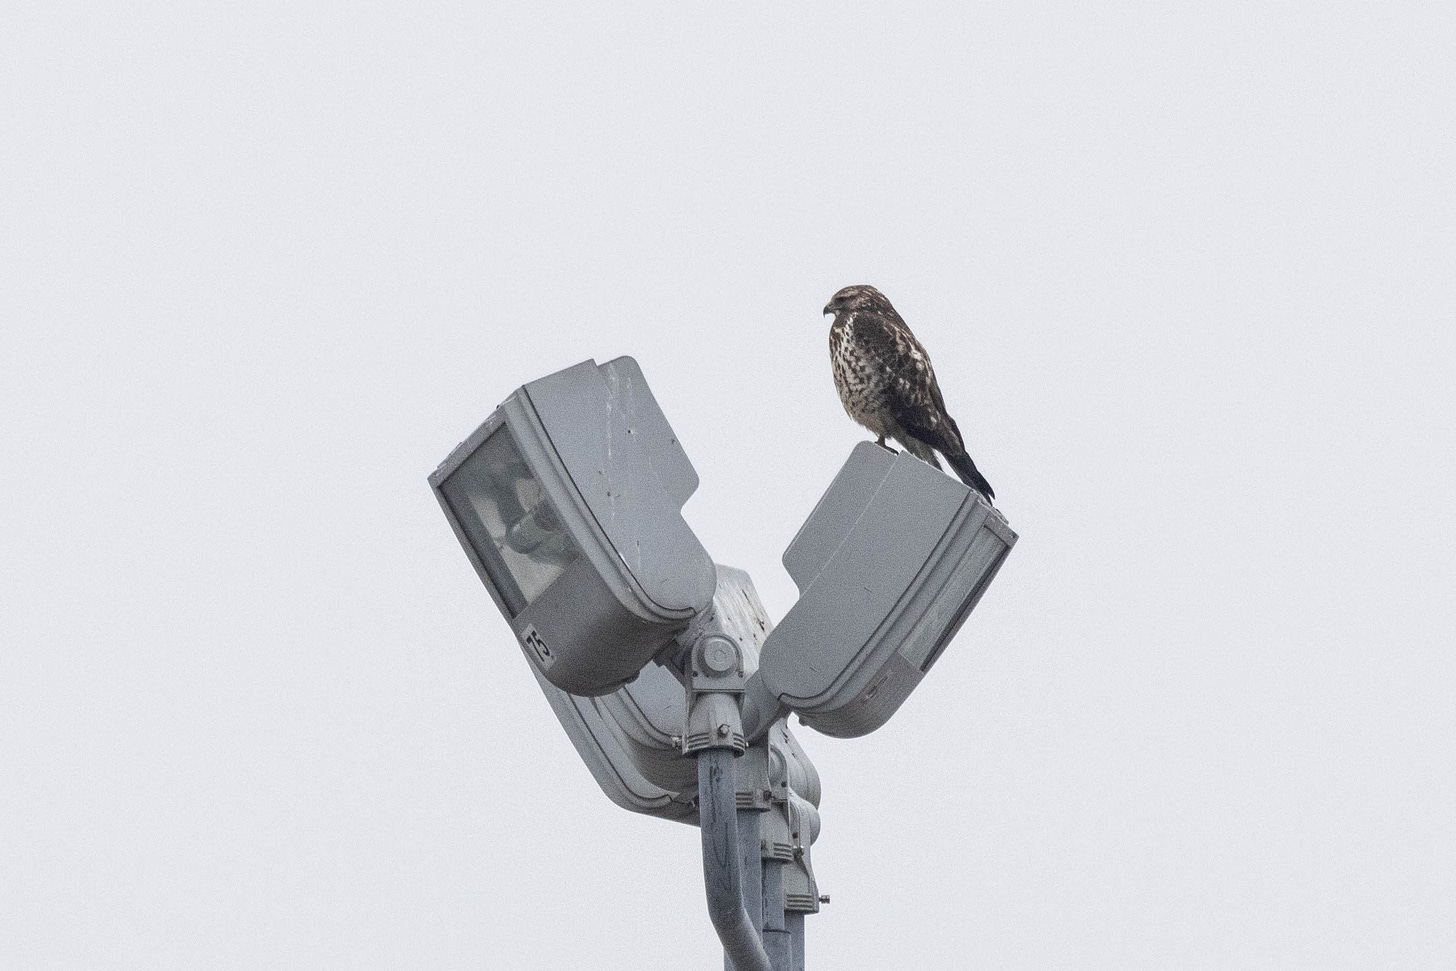 a brown hawk with brown vertical markings on its white belly perched on a lamppost, facing left, against a white sky